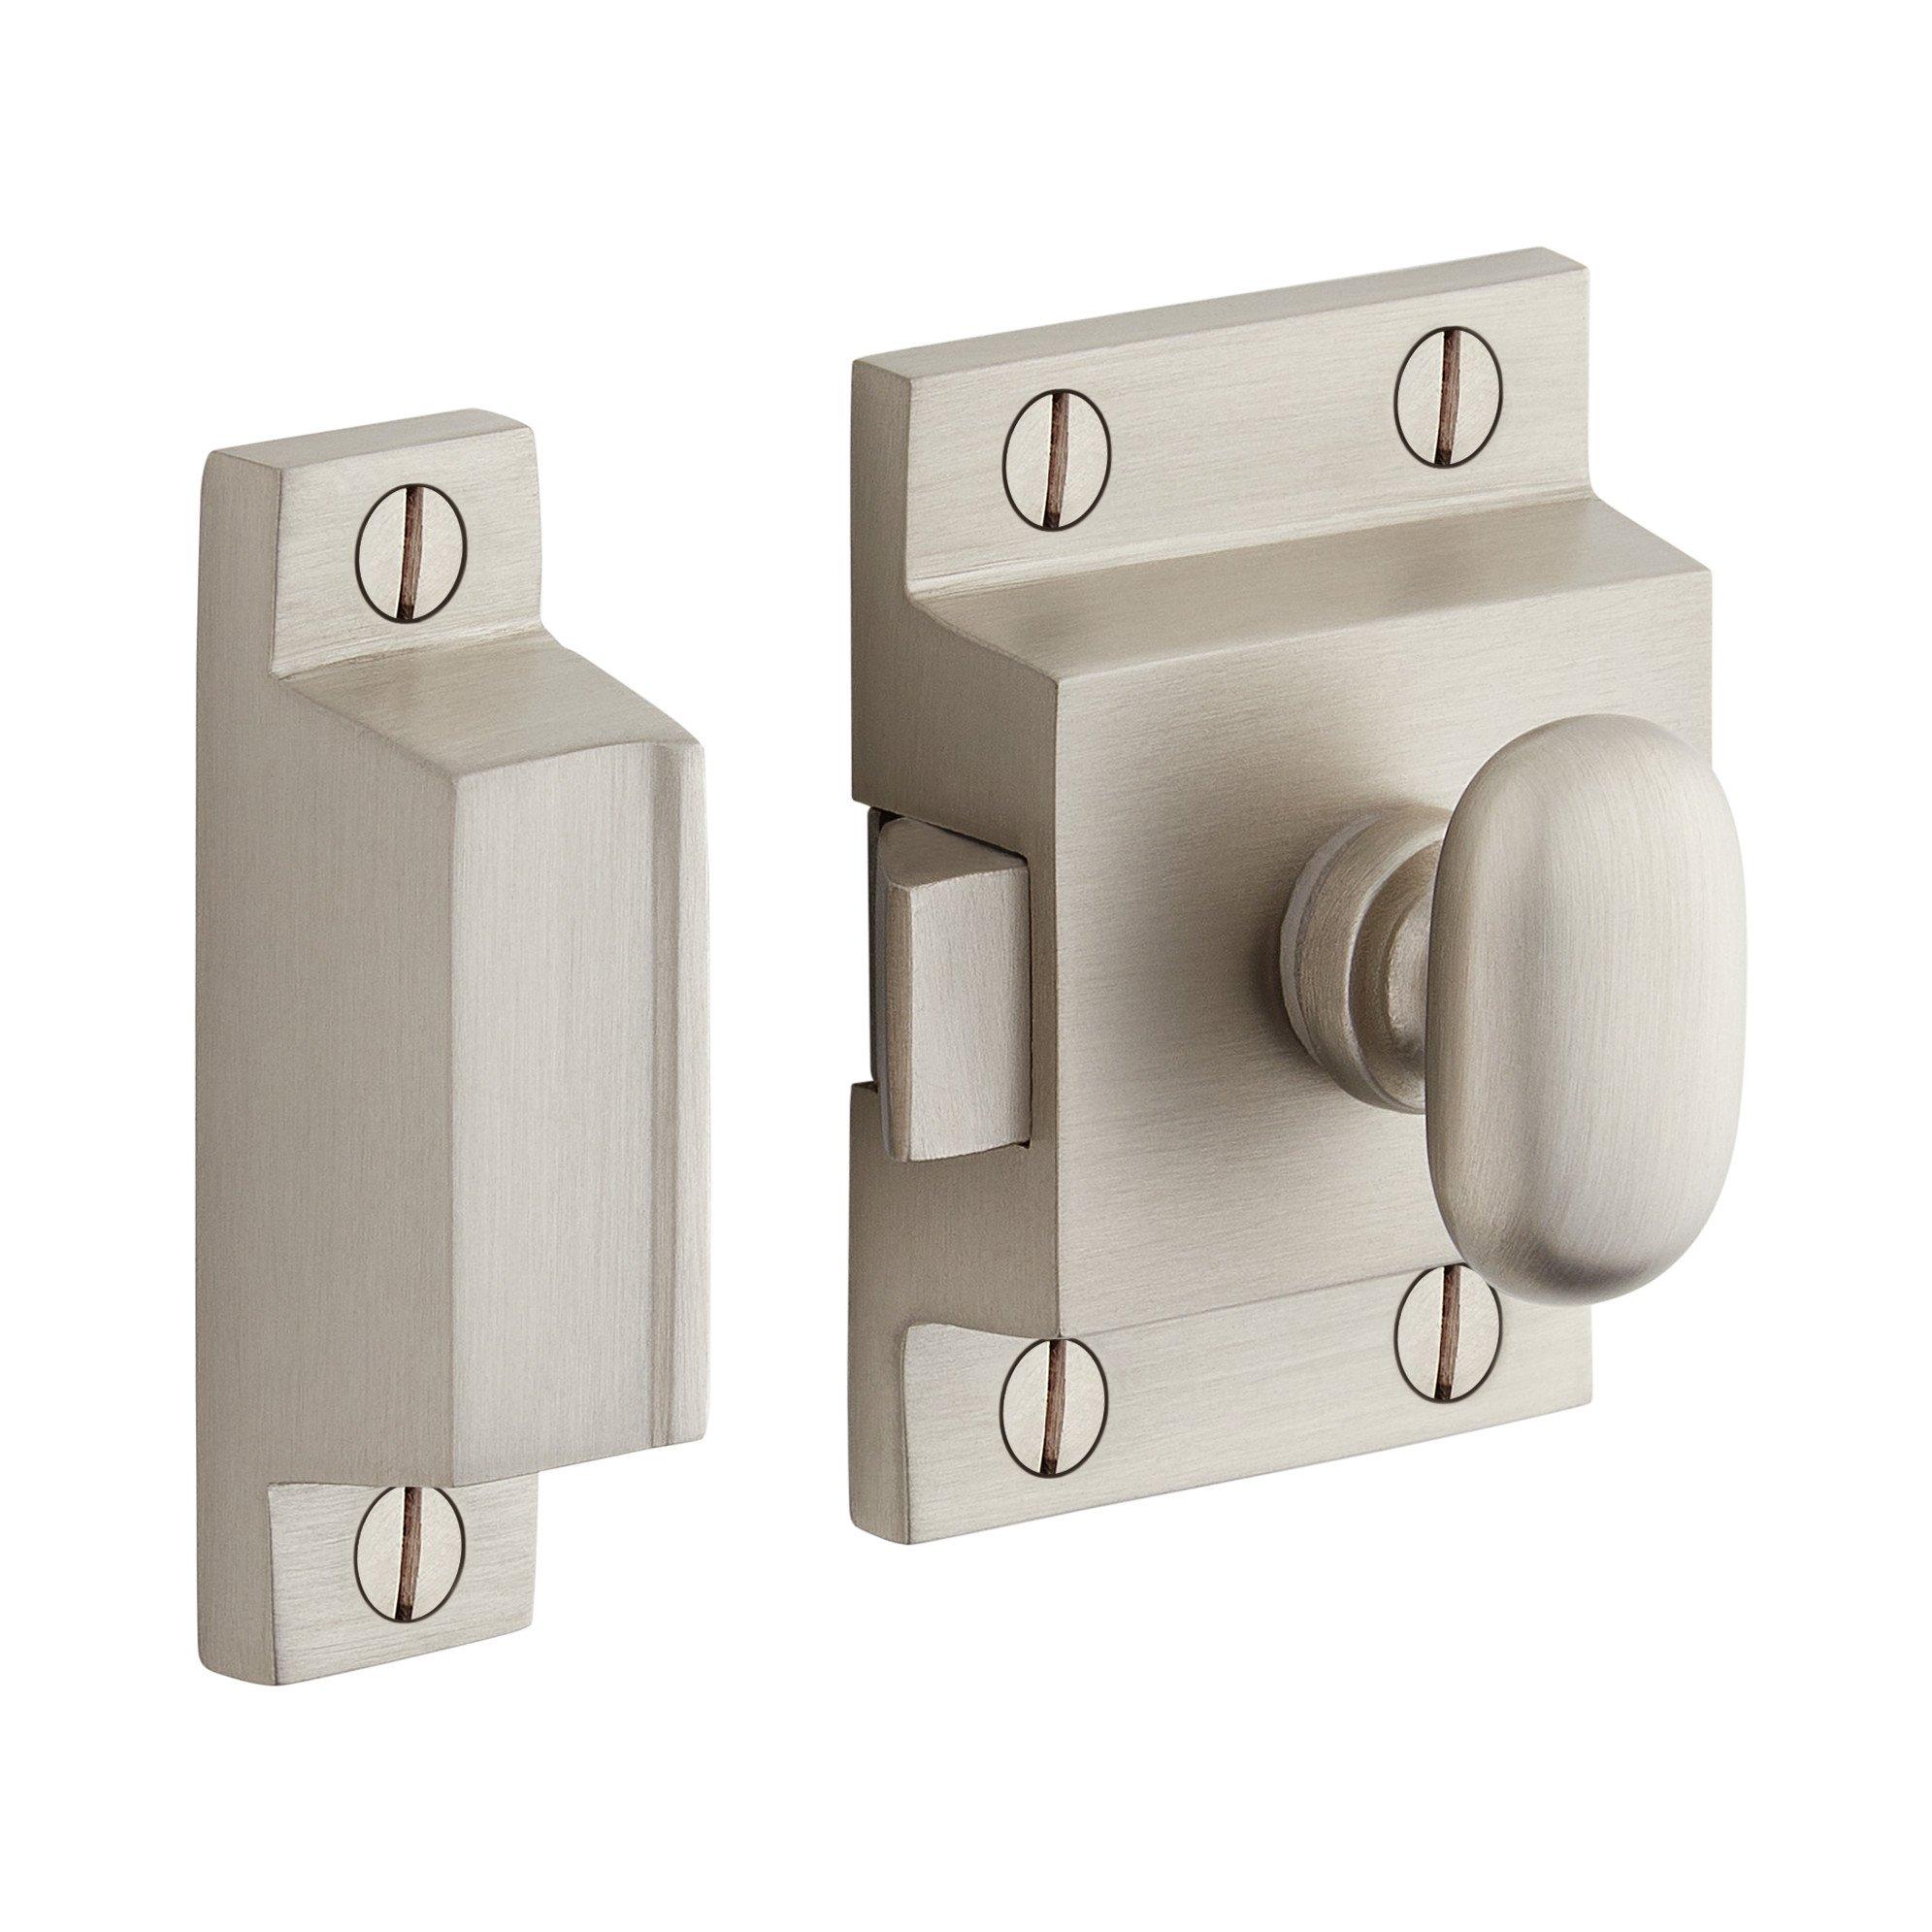 Pitkin Brass Cabinet Latches With Oval